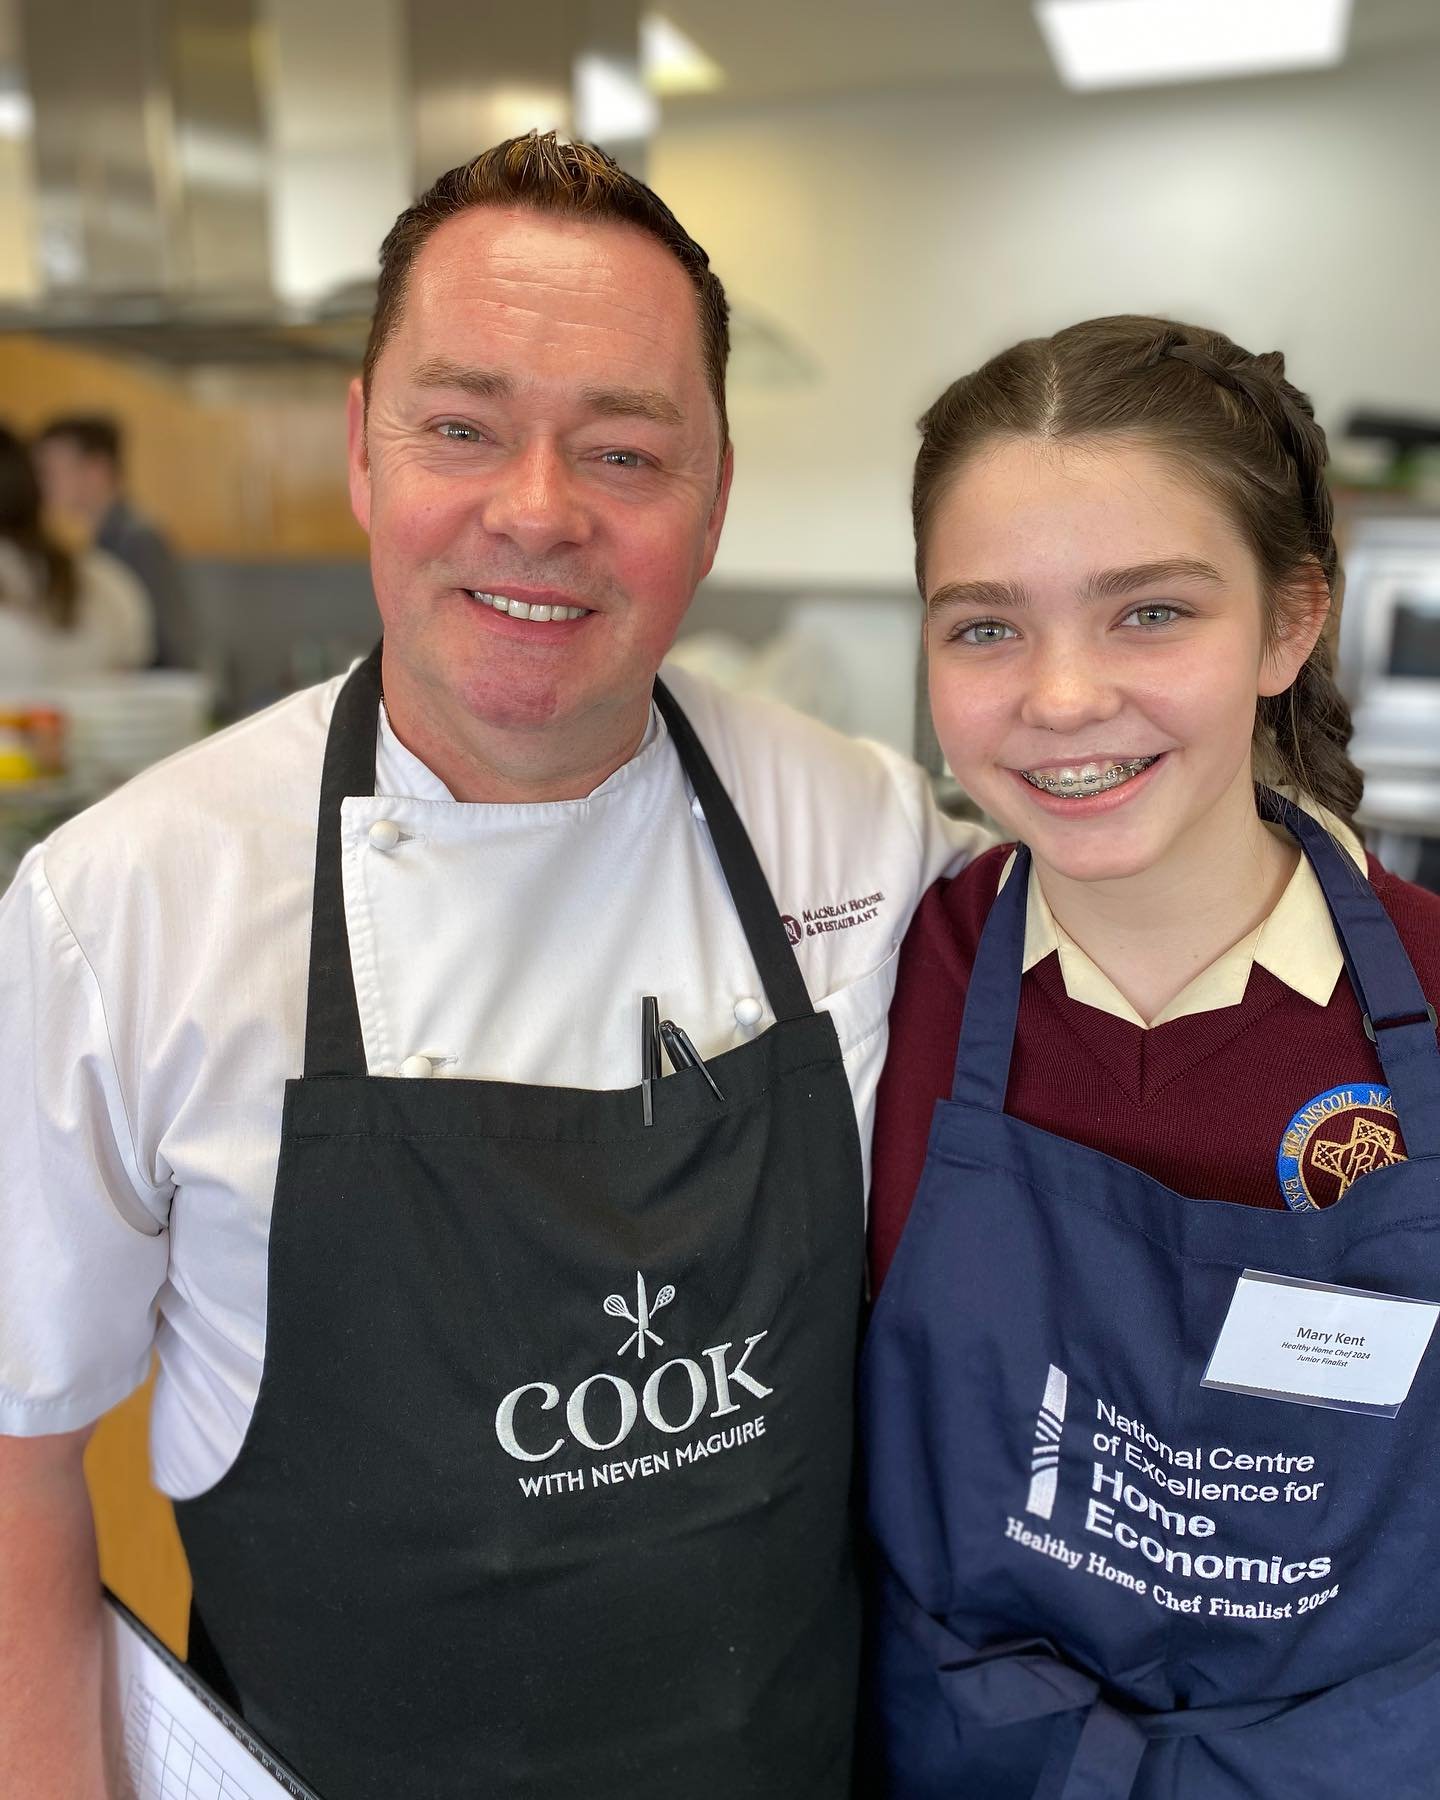 HEALTHY HOME CHEF Today Mary Kent, 3rd yr competed in the Healthy Home Chef competition in Sligo, whilst she didn&rsquo;t receive a place, we are so unbelievably proud of her. To be chosen from hundreds of entries from schools all around the country 